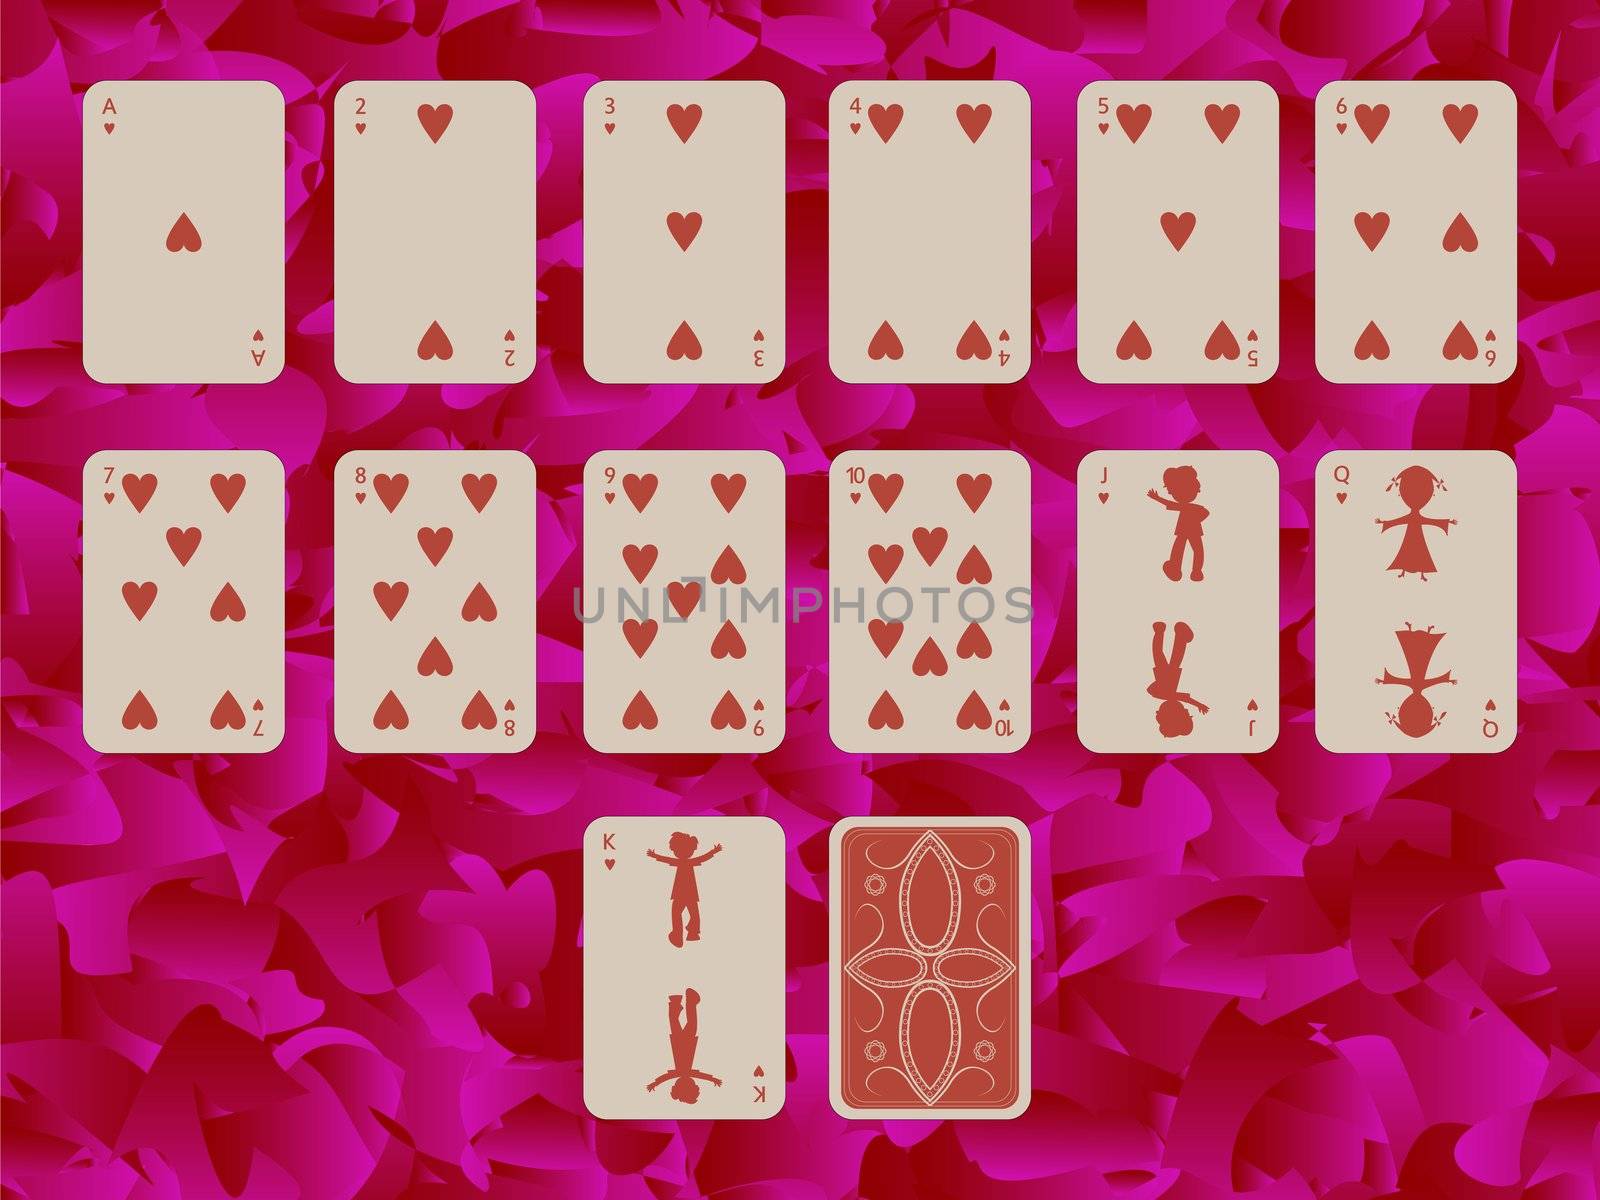 suit of hearts playing cards on purple background by robertosch